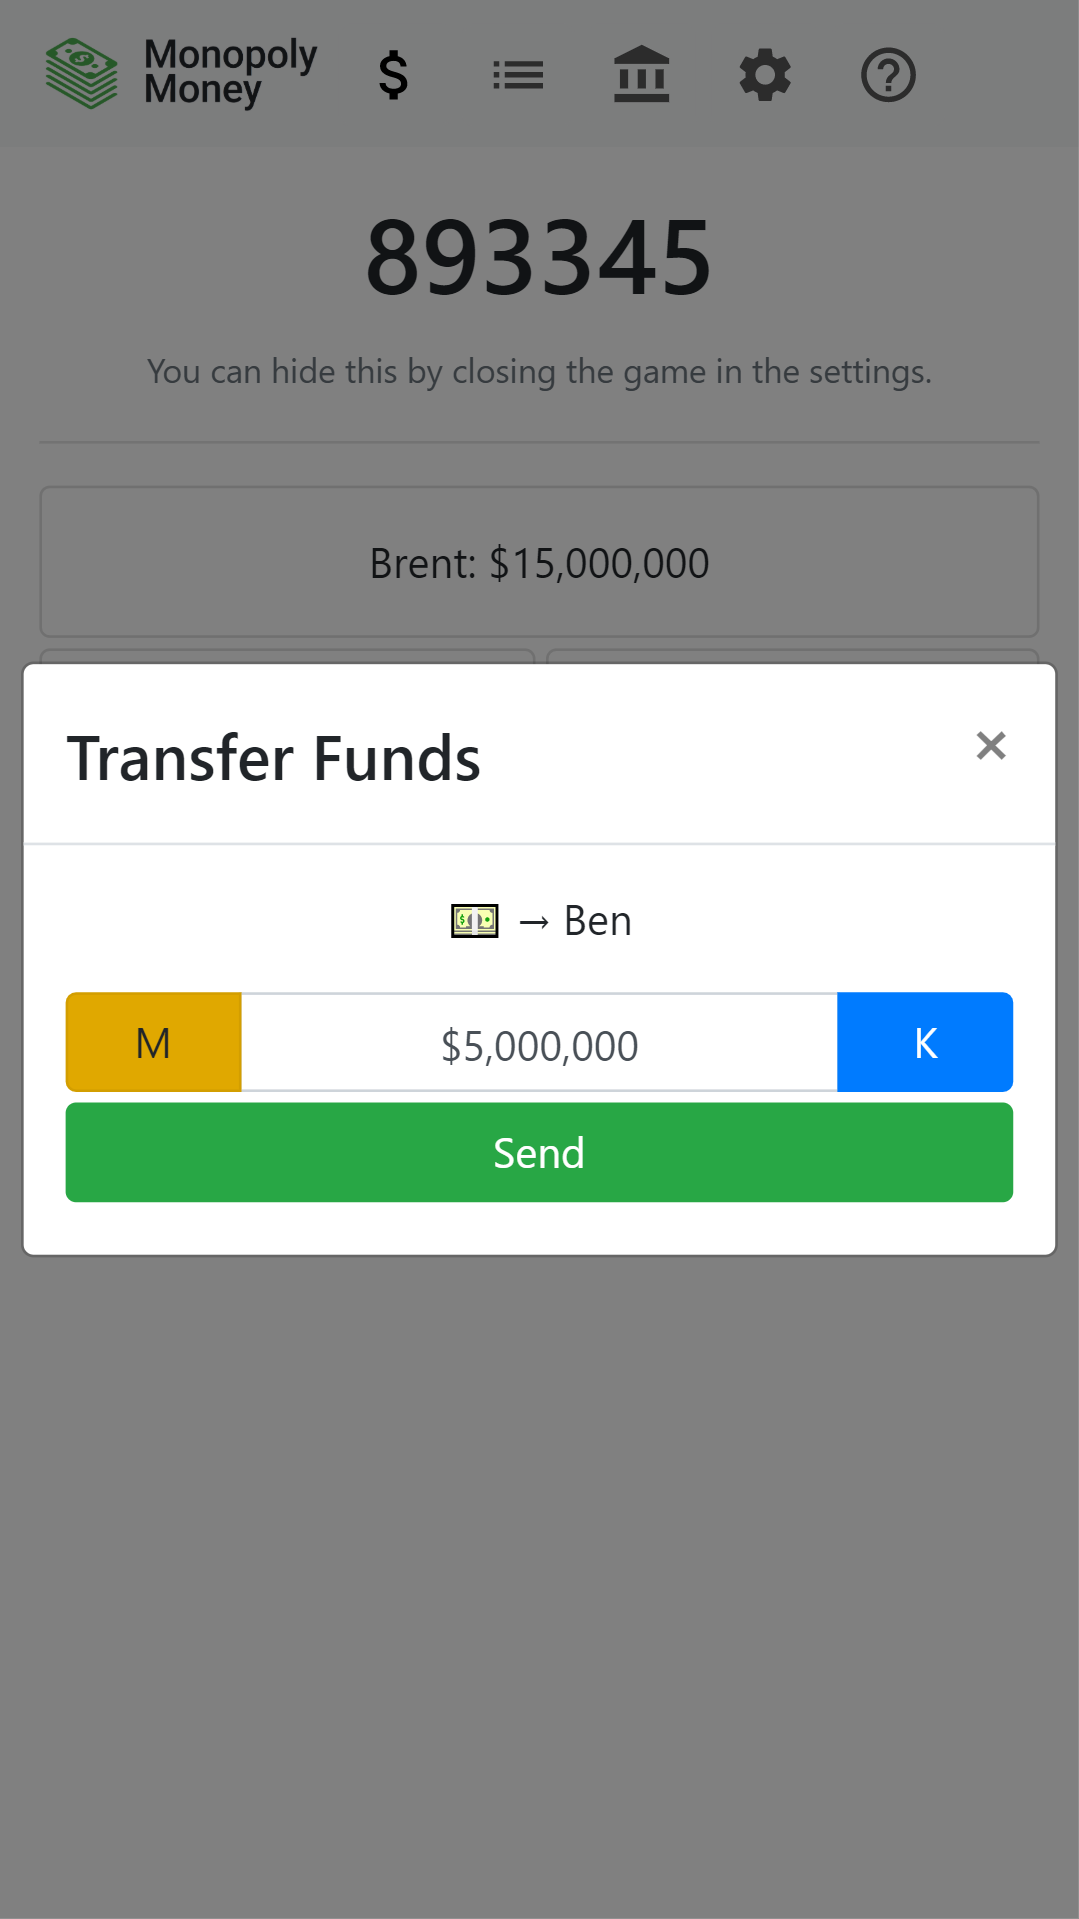 Transfering funds